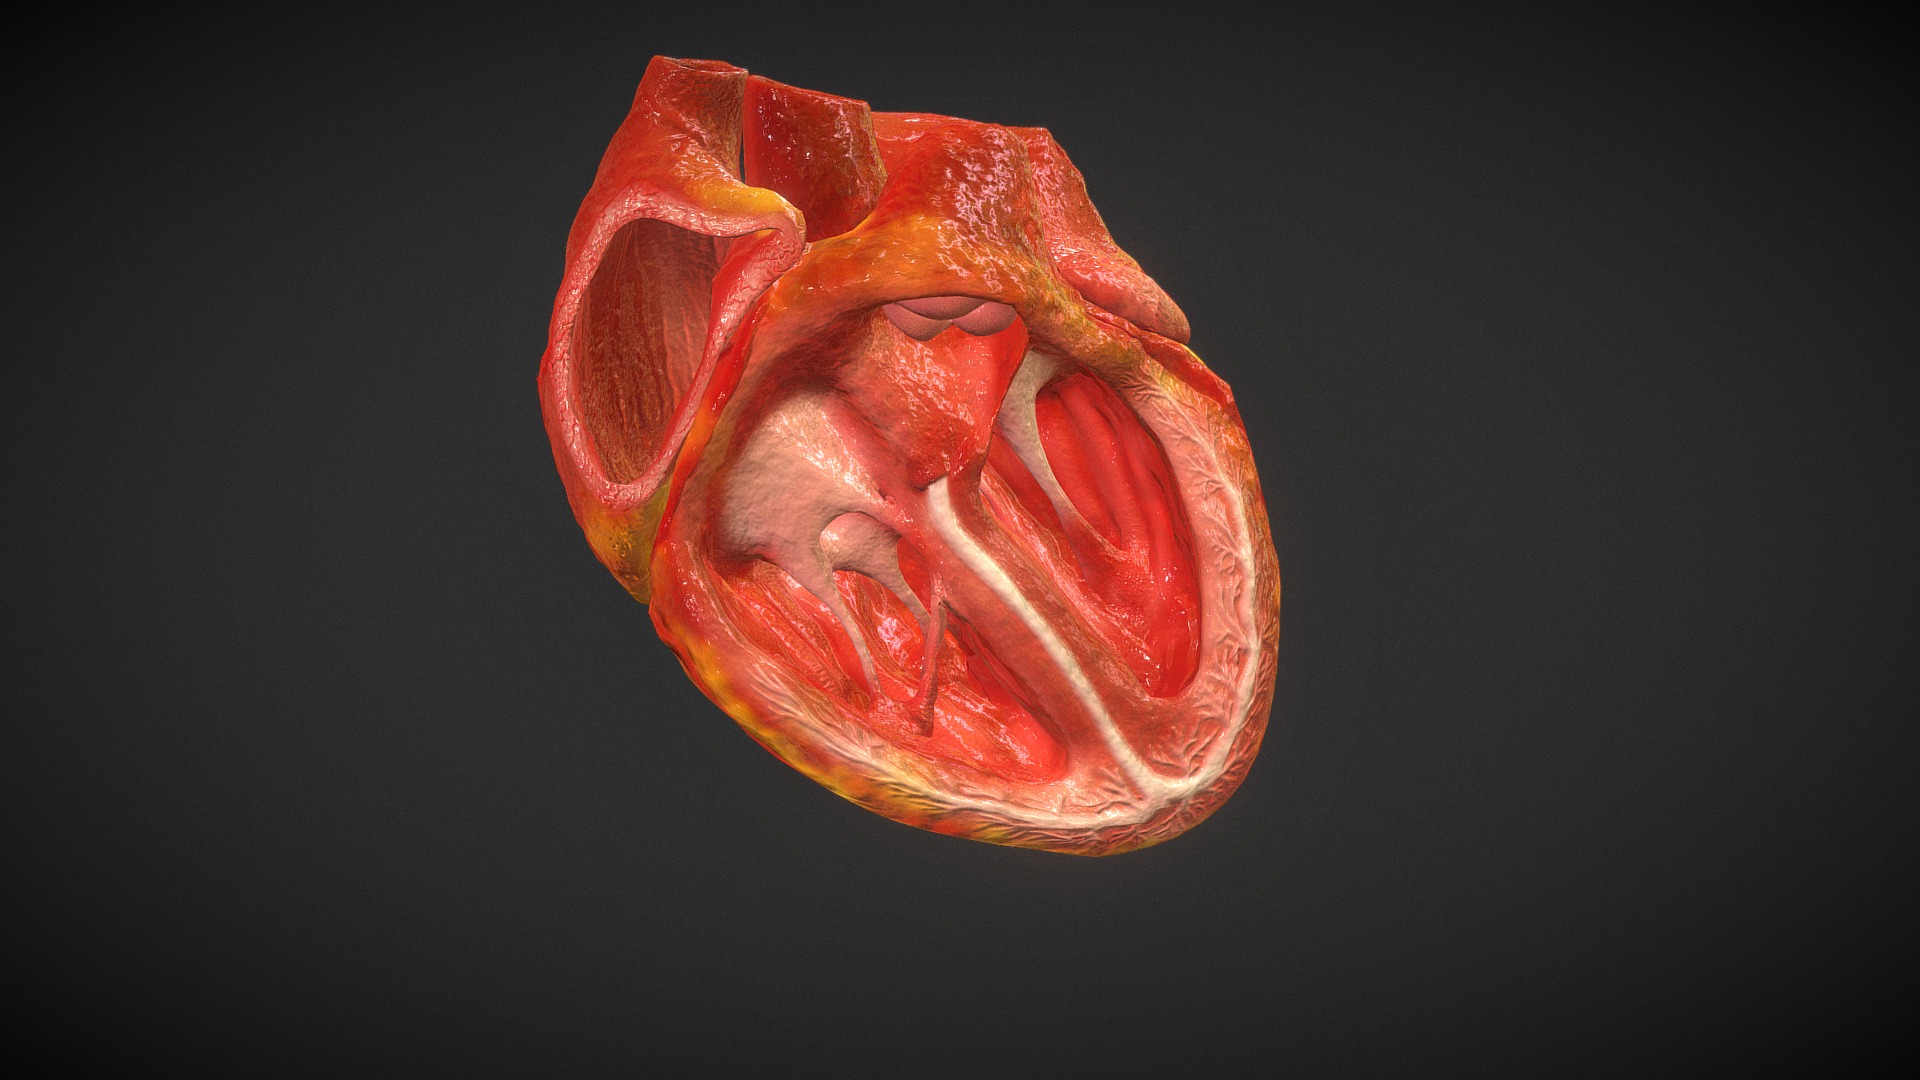 3D model Heart with Cut Right Atrium - This is a 3D model of the Heart with Cut Right Atrium. The 3D model is about a red and white flower.